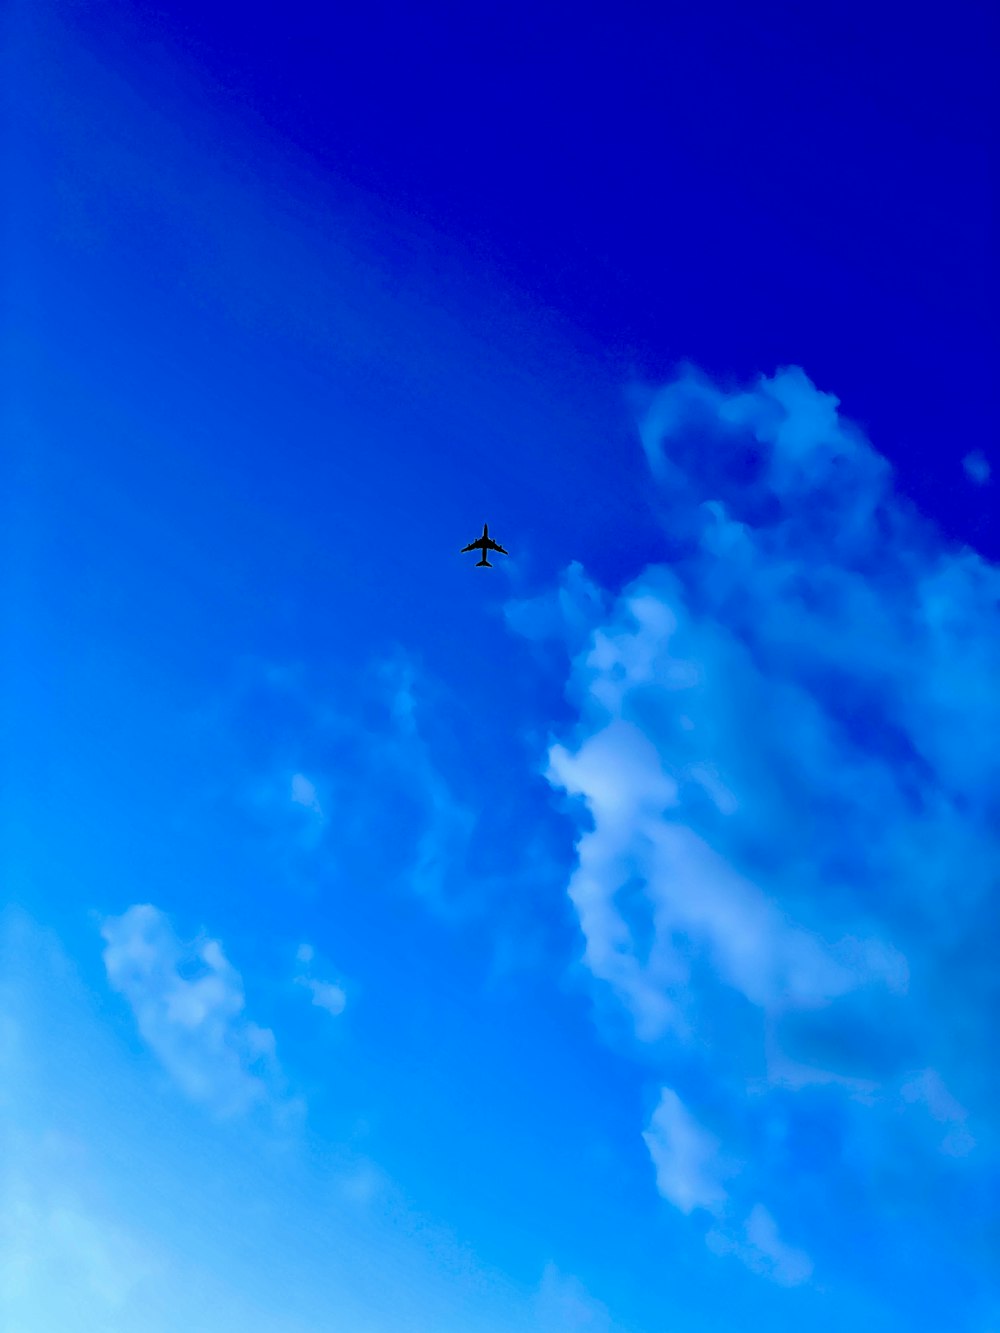 airplane in mid air under blue sky during daytime